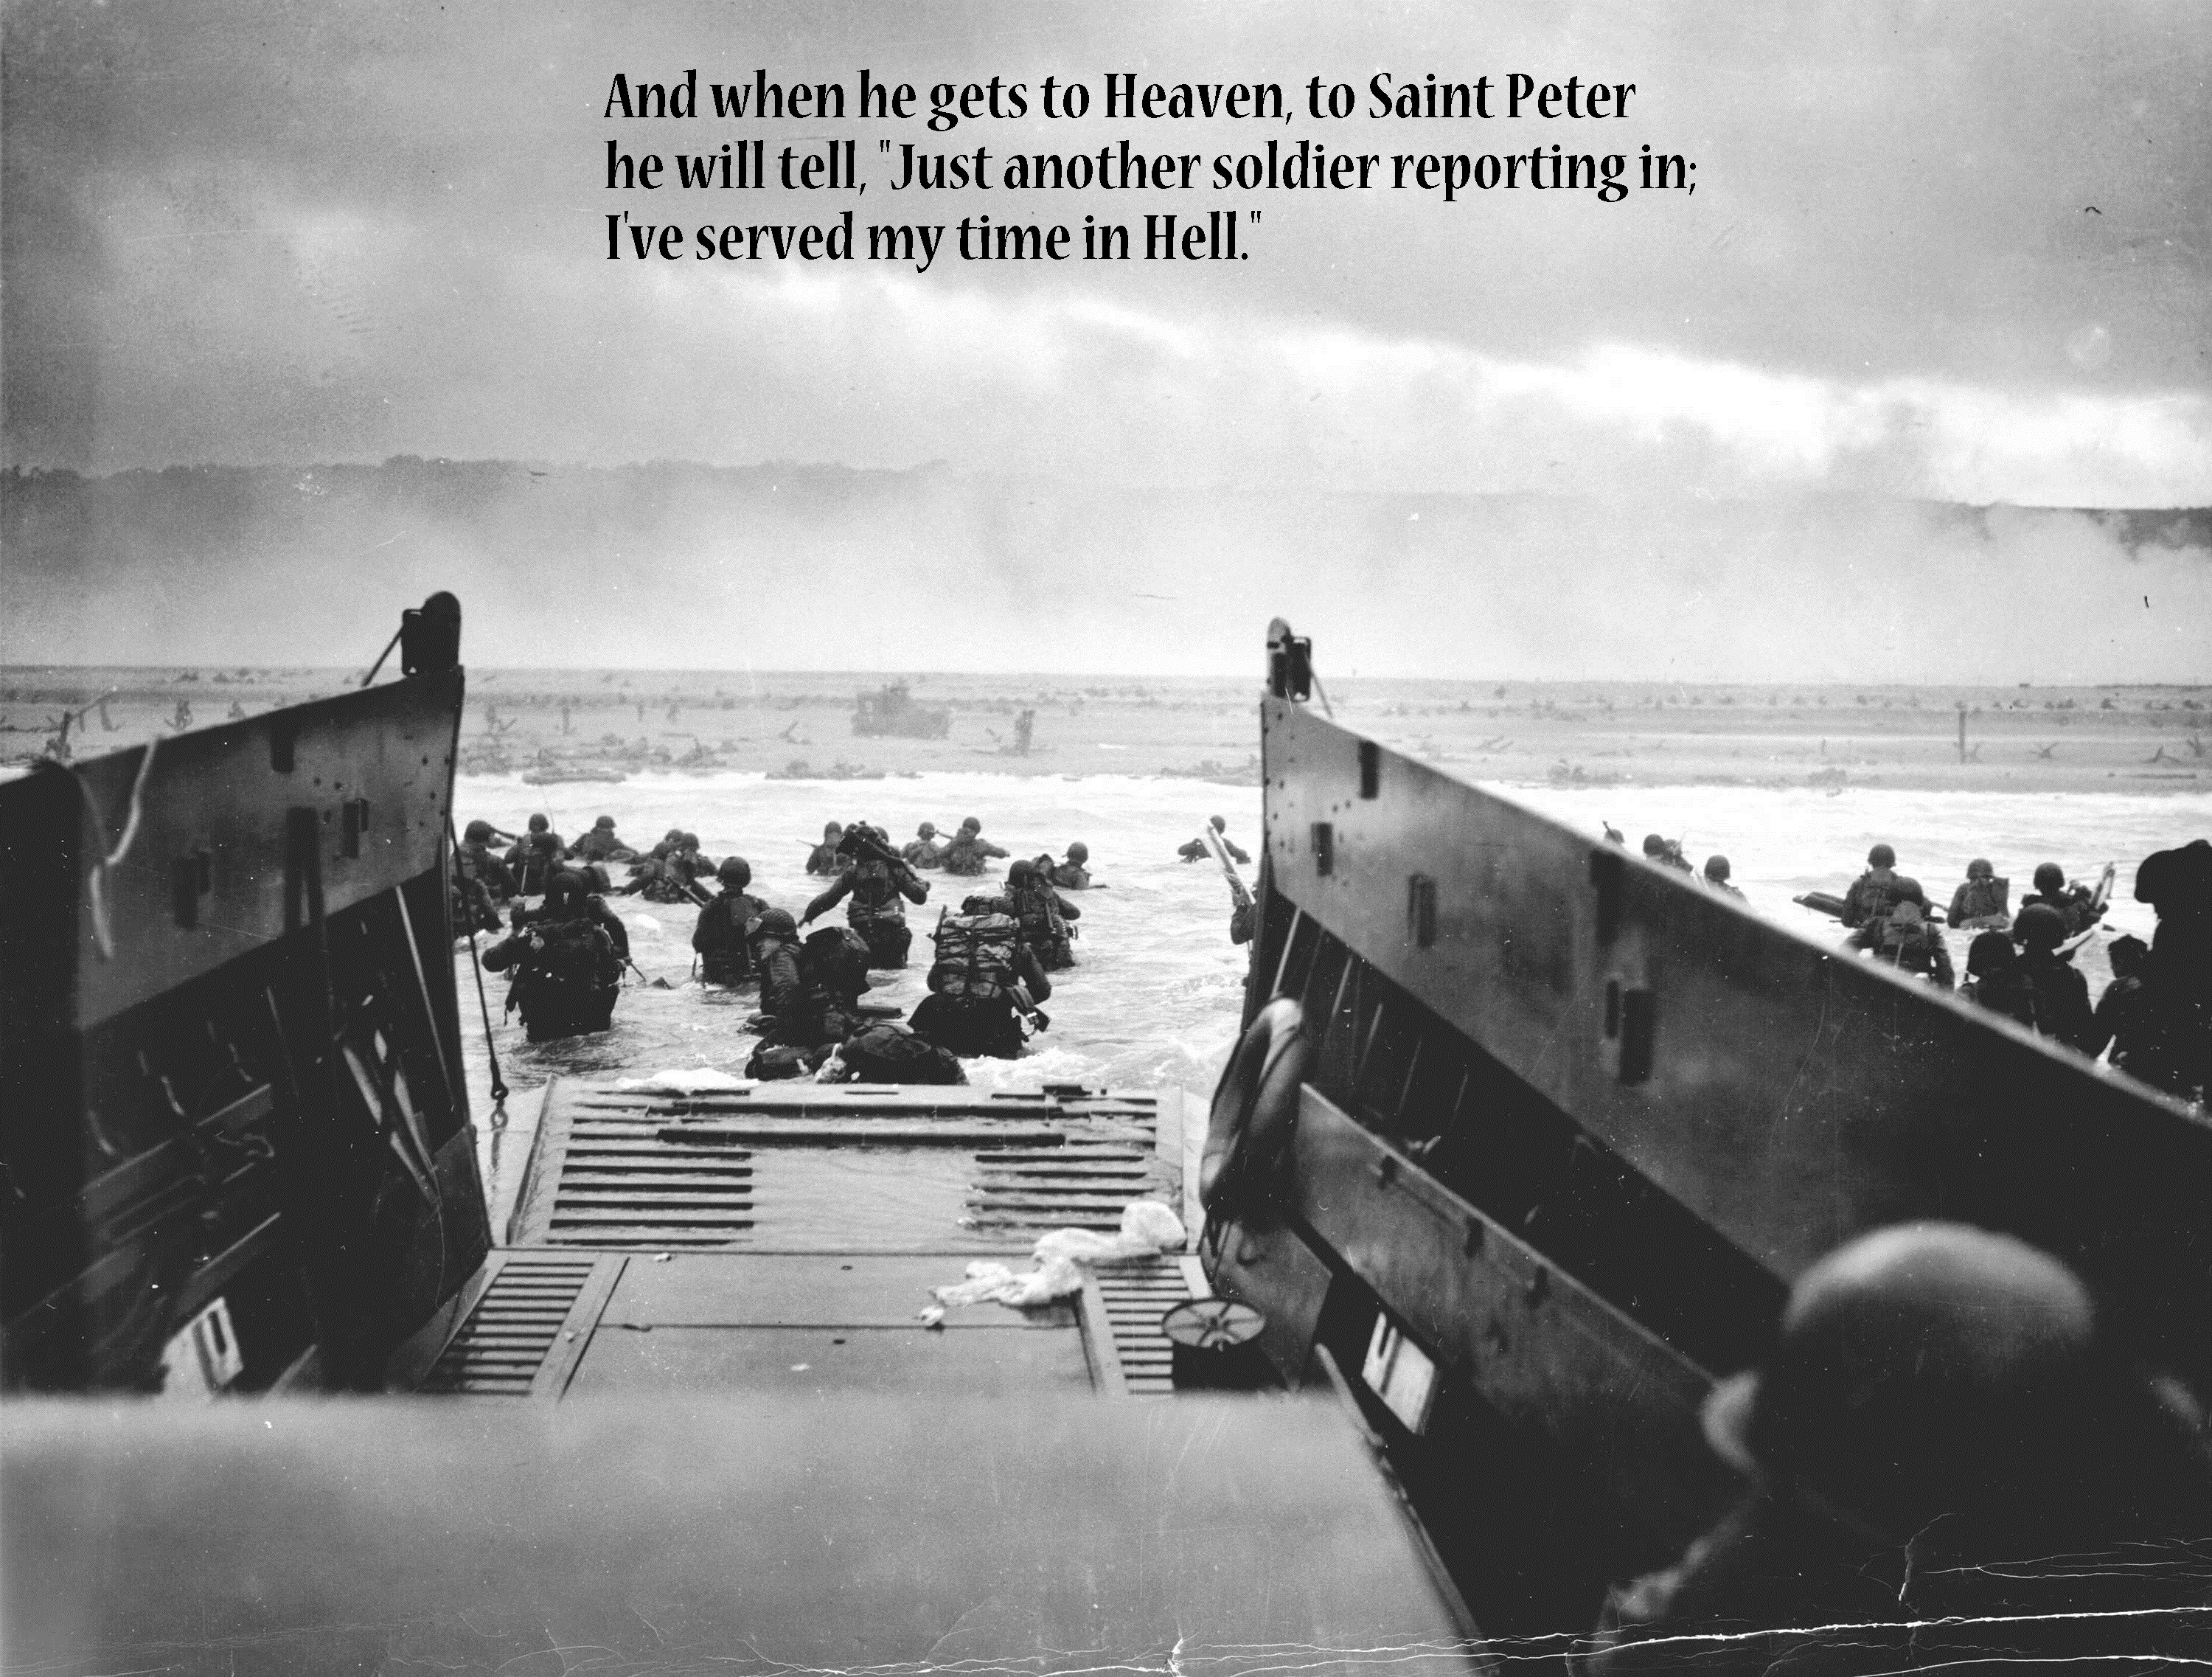 Quote World War Ii Military Monochrome 1944 Year Vintage Soldier D Day Cringy 3000x2274